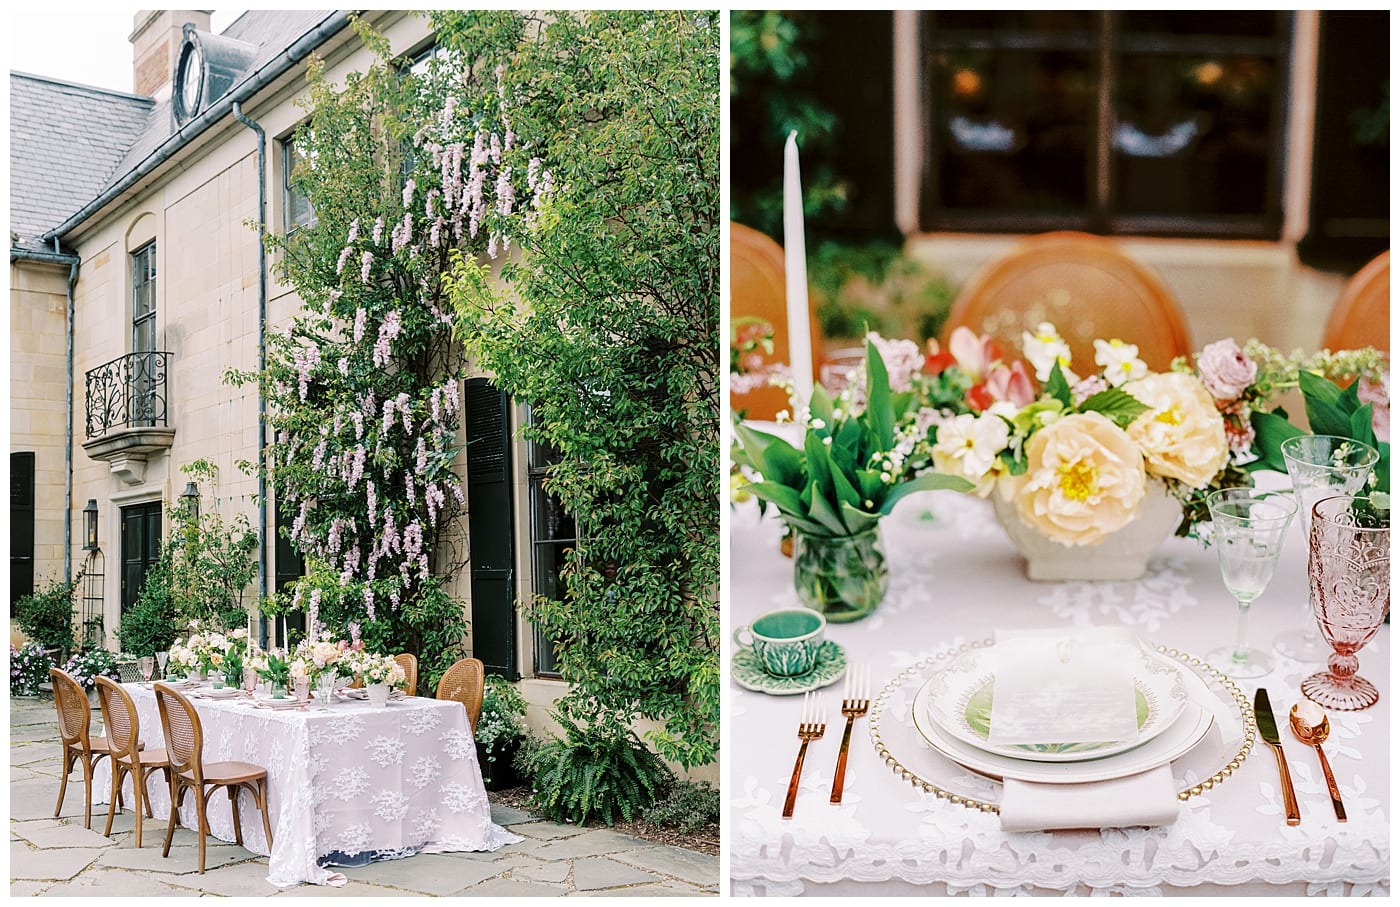 French Inspired Chateau Wedding at Greencrest Manor - Leidy & Josh ...